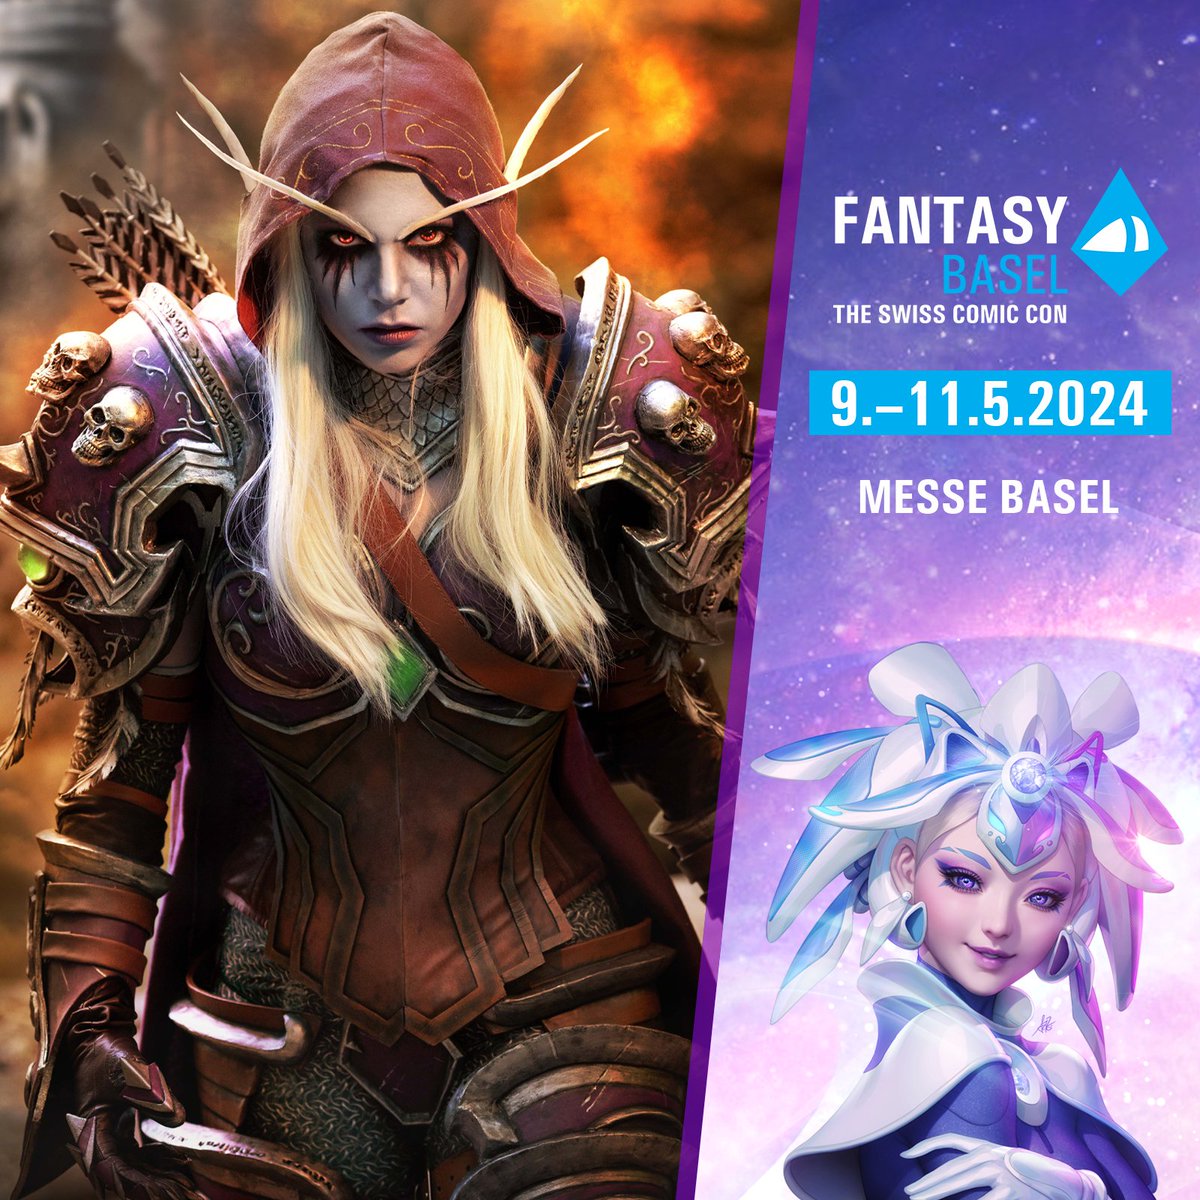 I can't wait to see you at @FantasyBasel ❤️ Many amazing guests will be there, too! I'm so excited being reunited with a lot of my friends 🥰✨️ I will reveal my cosplay lineup later, I may have surprises 👀 #fantasybasel